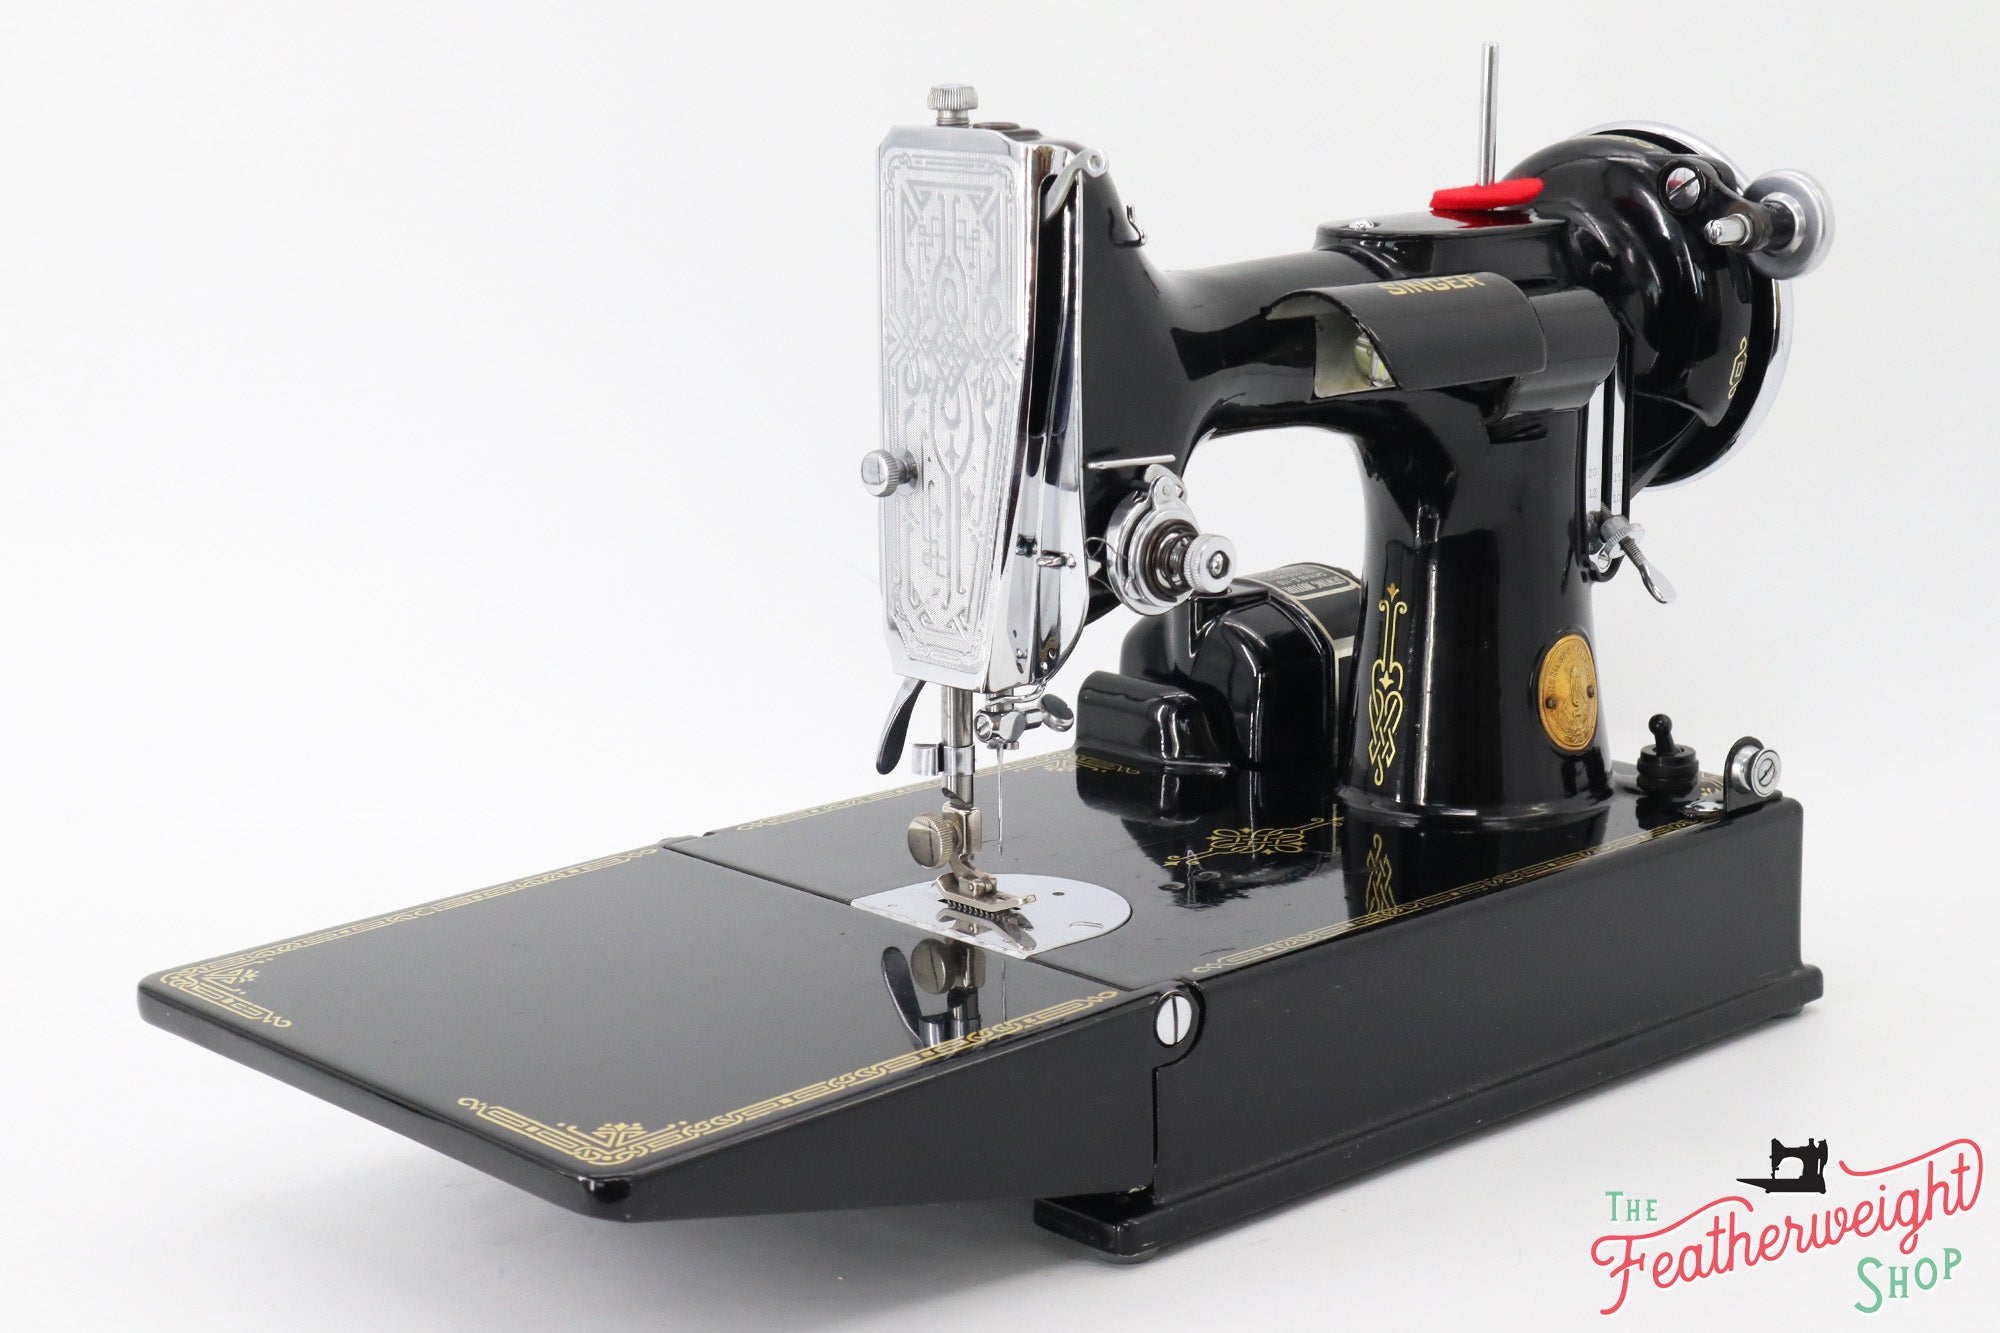 Thread Post for Vintage Singer Sewing Machines – The Singer Featherweight  Shop